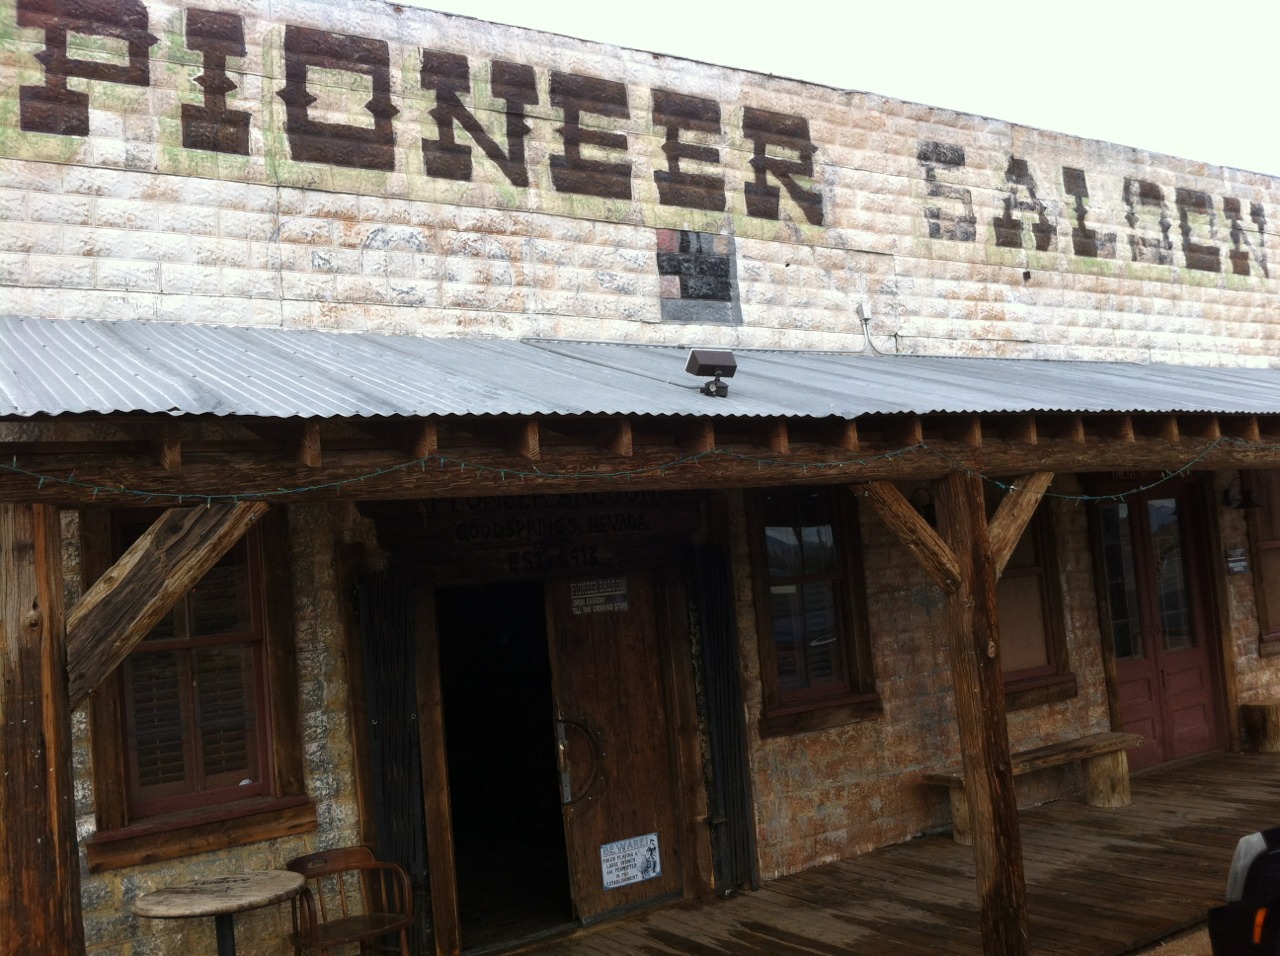 Stopped by the Goodsprings General Store and Pioneer Saloon for pictures. The people